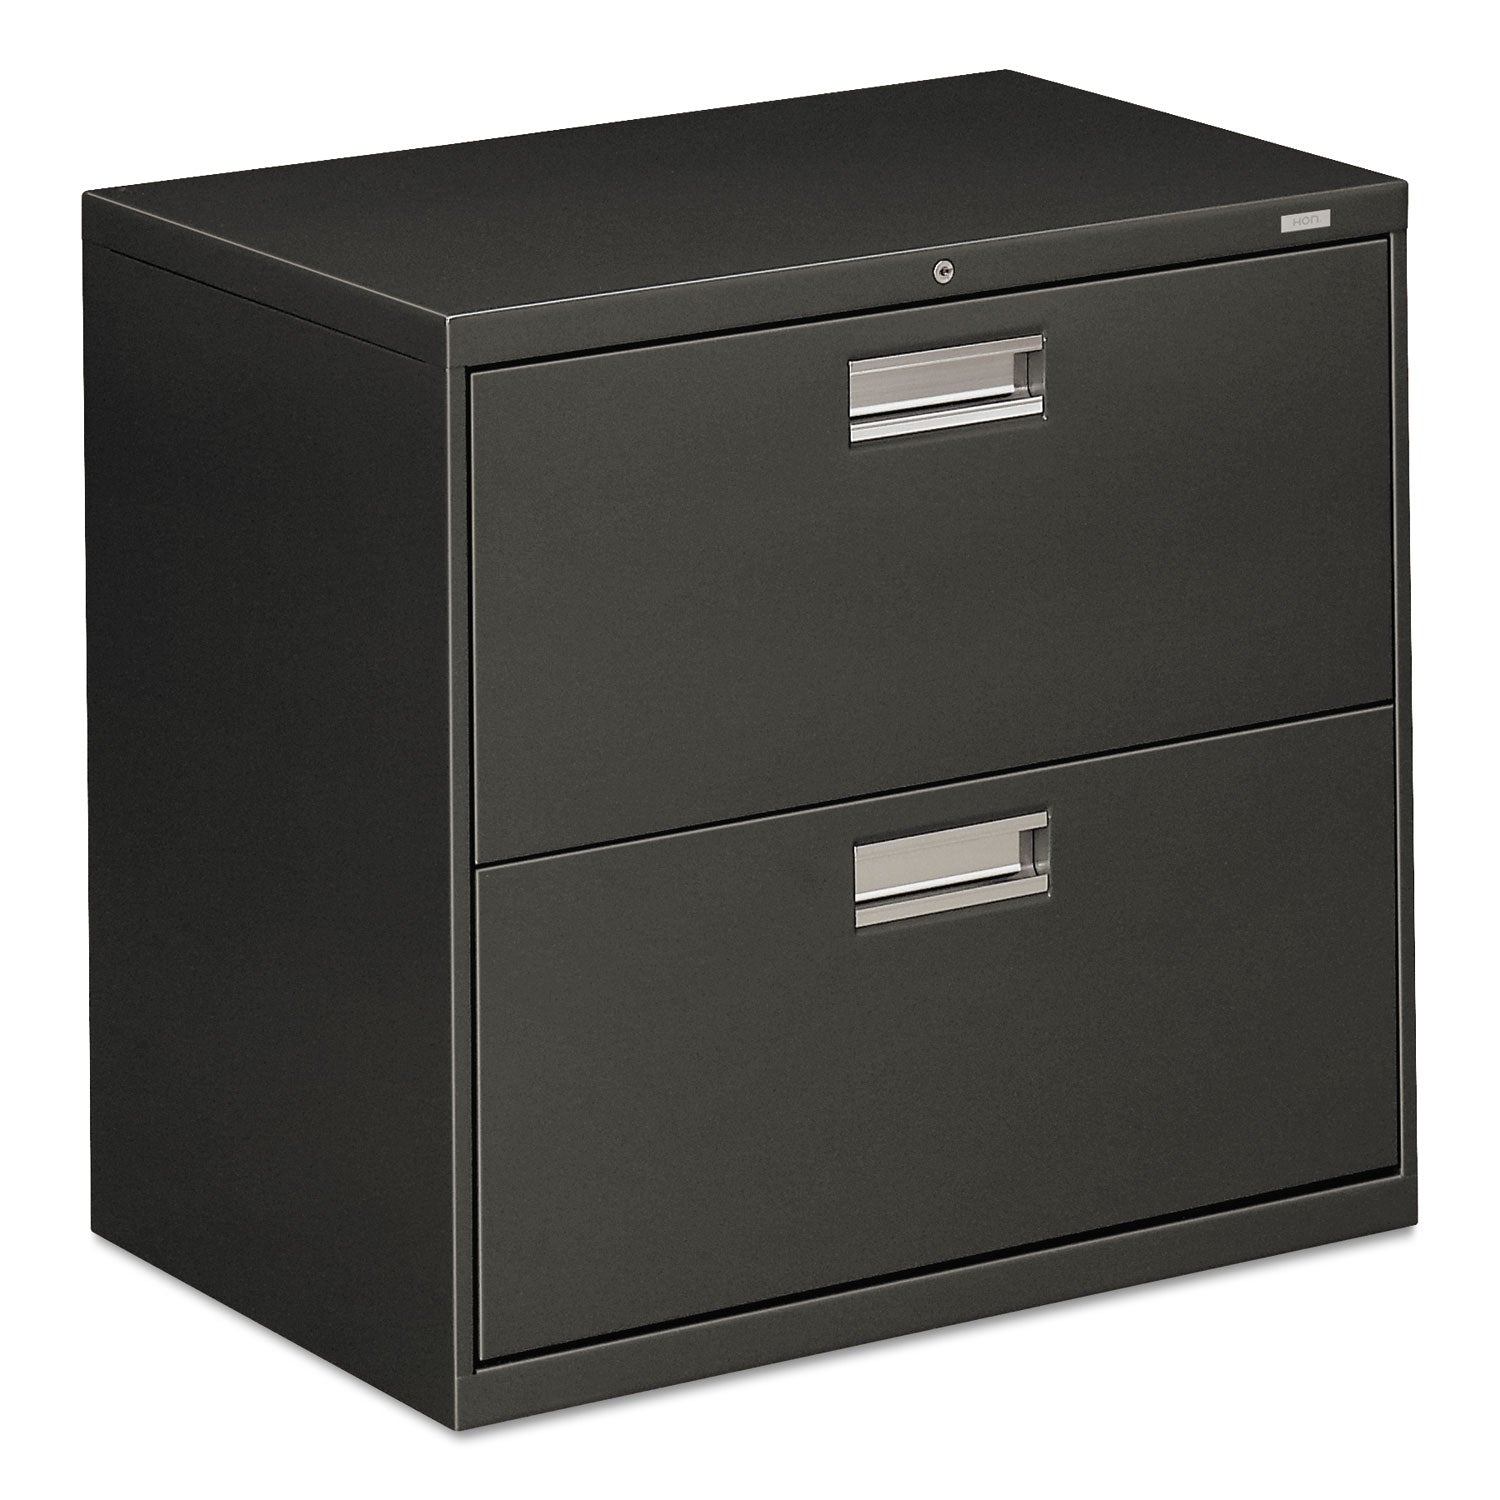 Brigade 600 Series Lateral File, 2 Legal/Letter-Size File Drawers, Charcoal, 30" x 18" x 28 - 